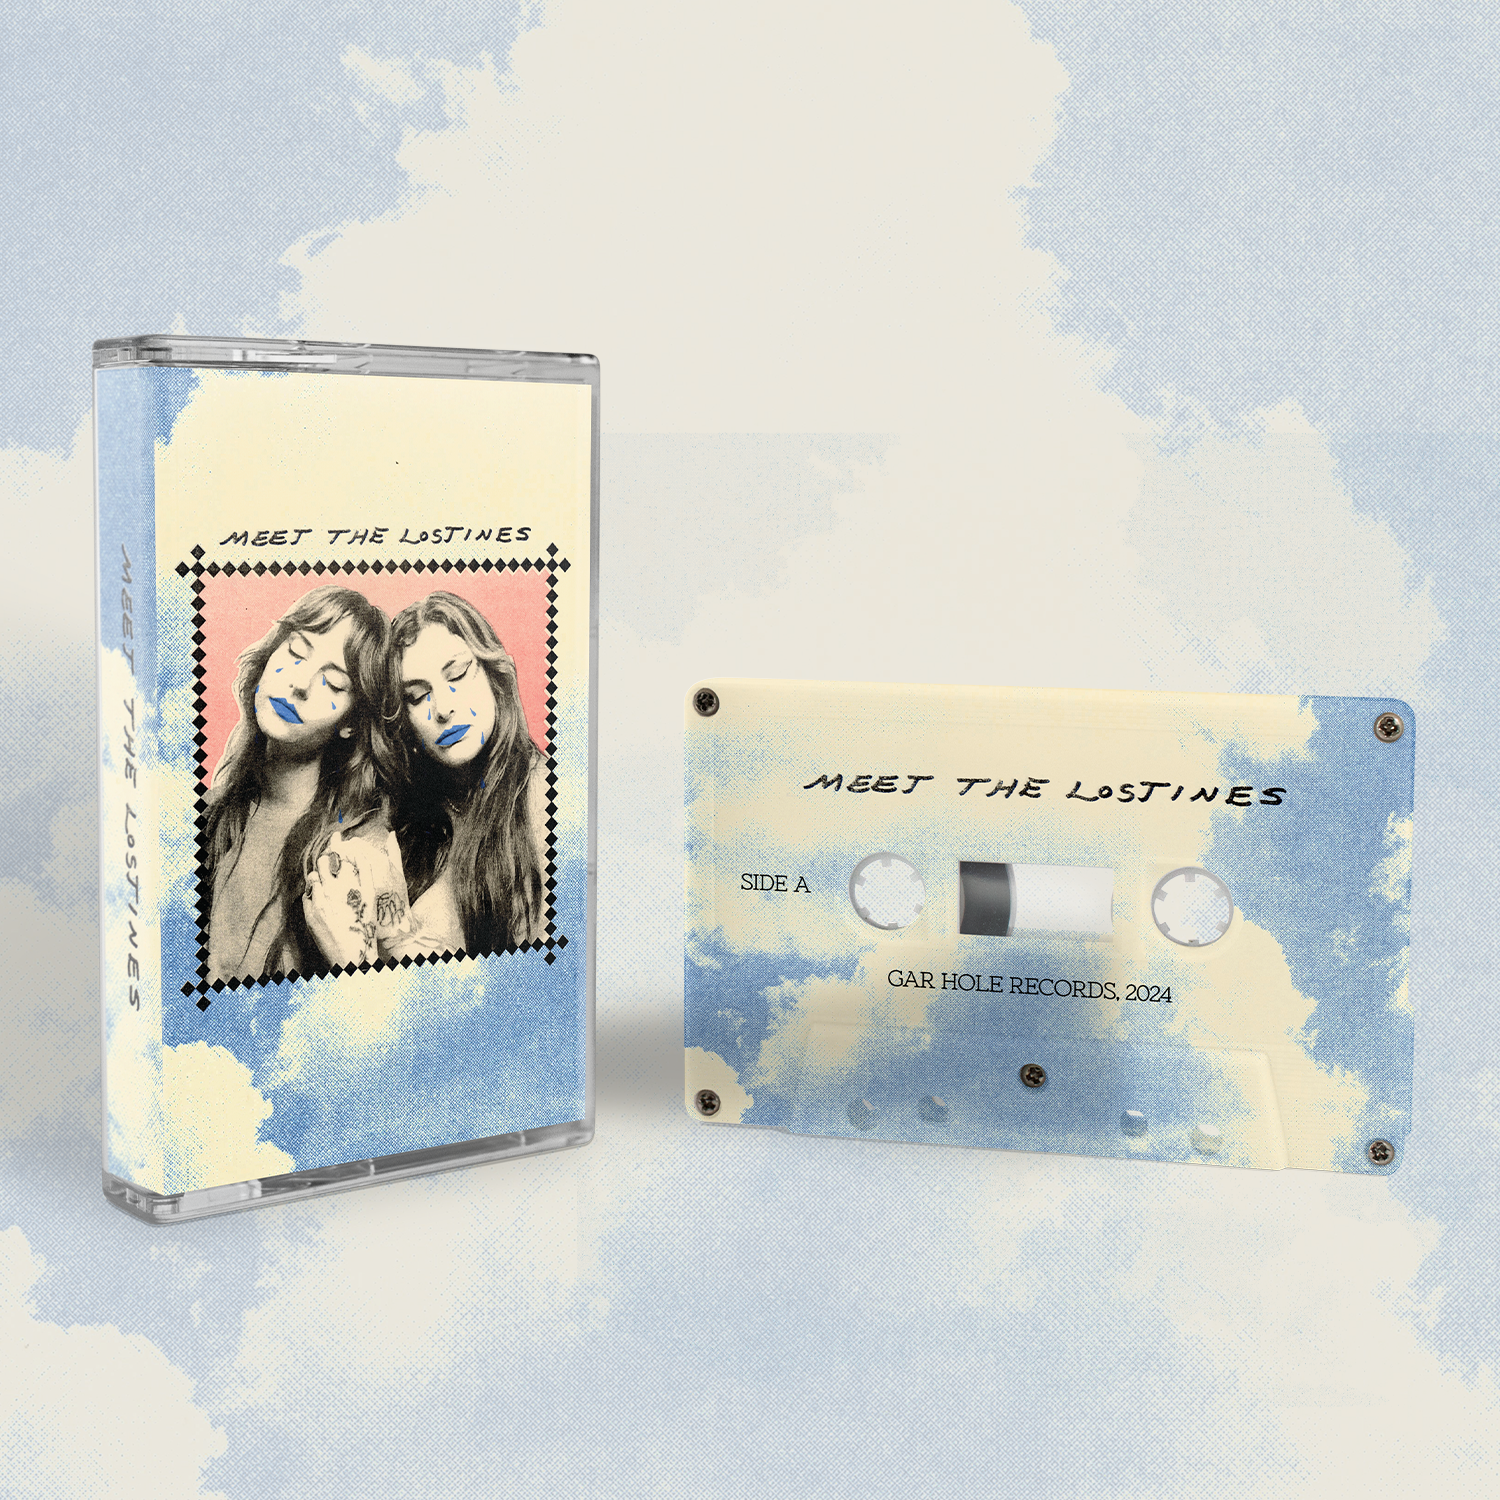 The Lostines - "Meet the Lostines" Cassette